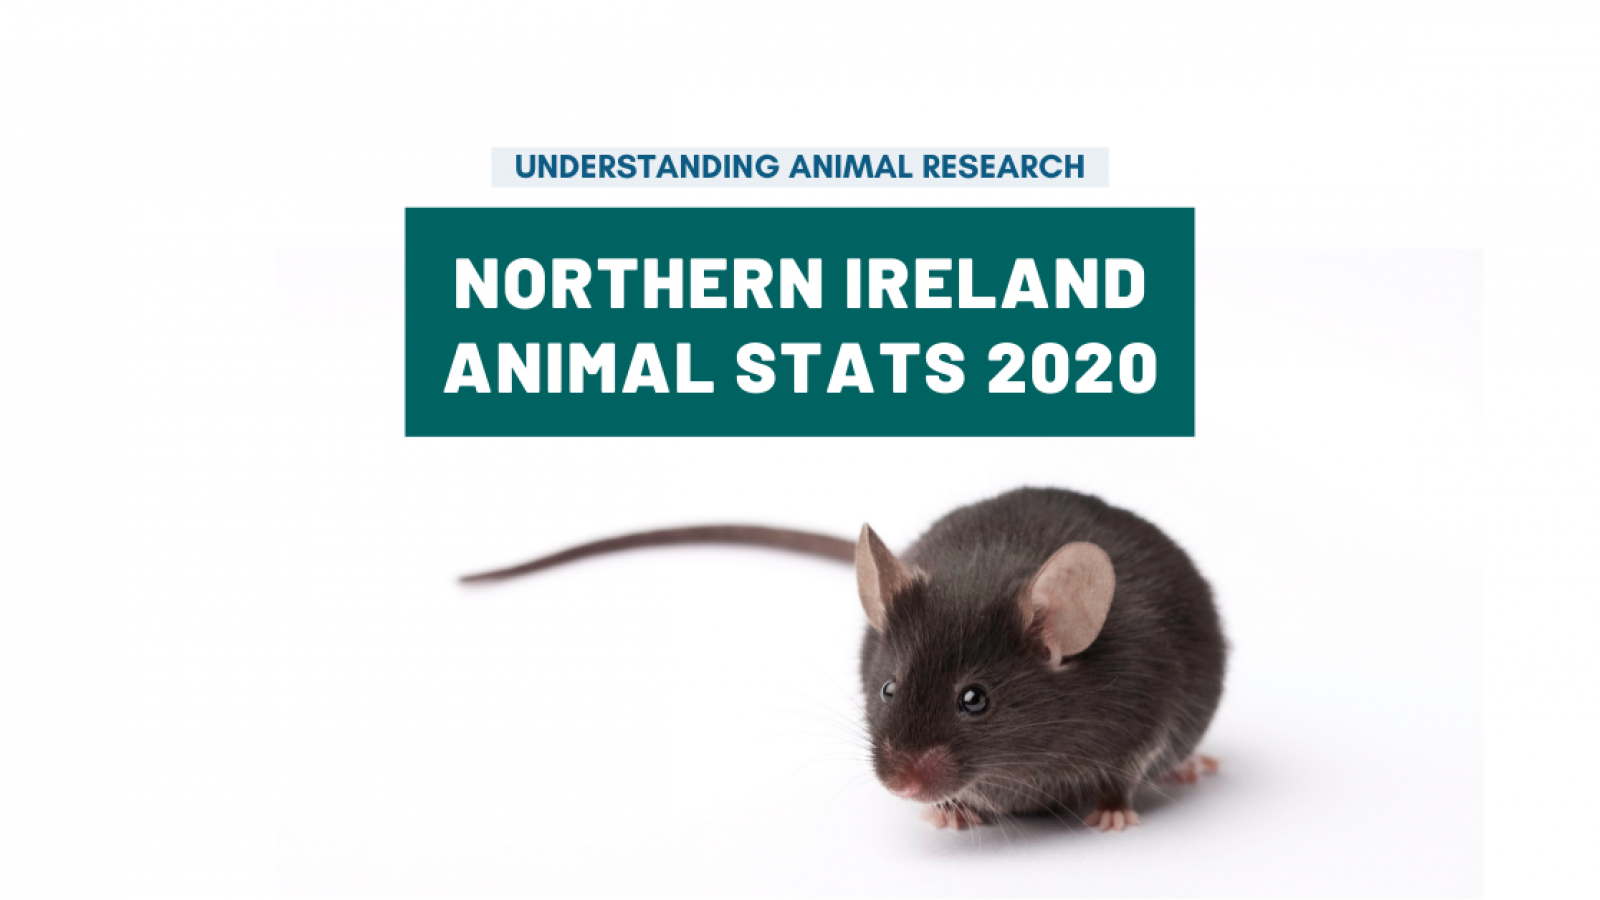 Procedures carried out on animals in Northern Ireland, 2020